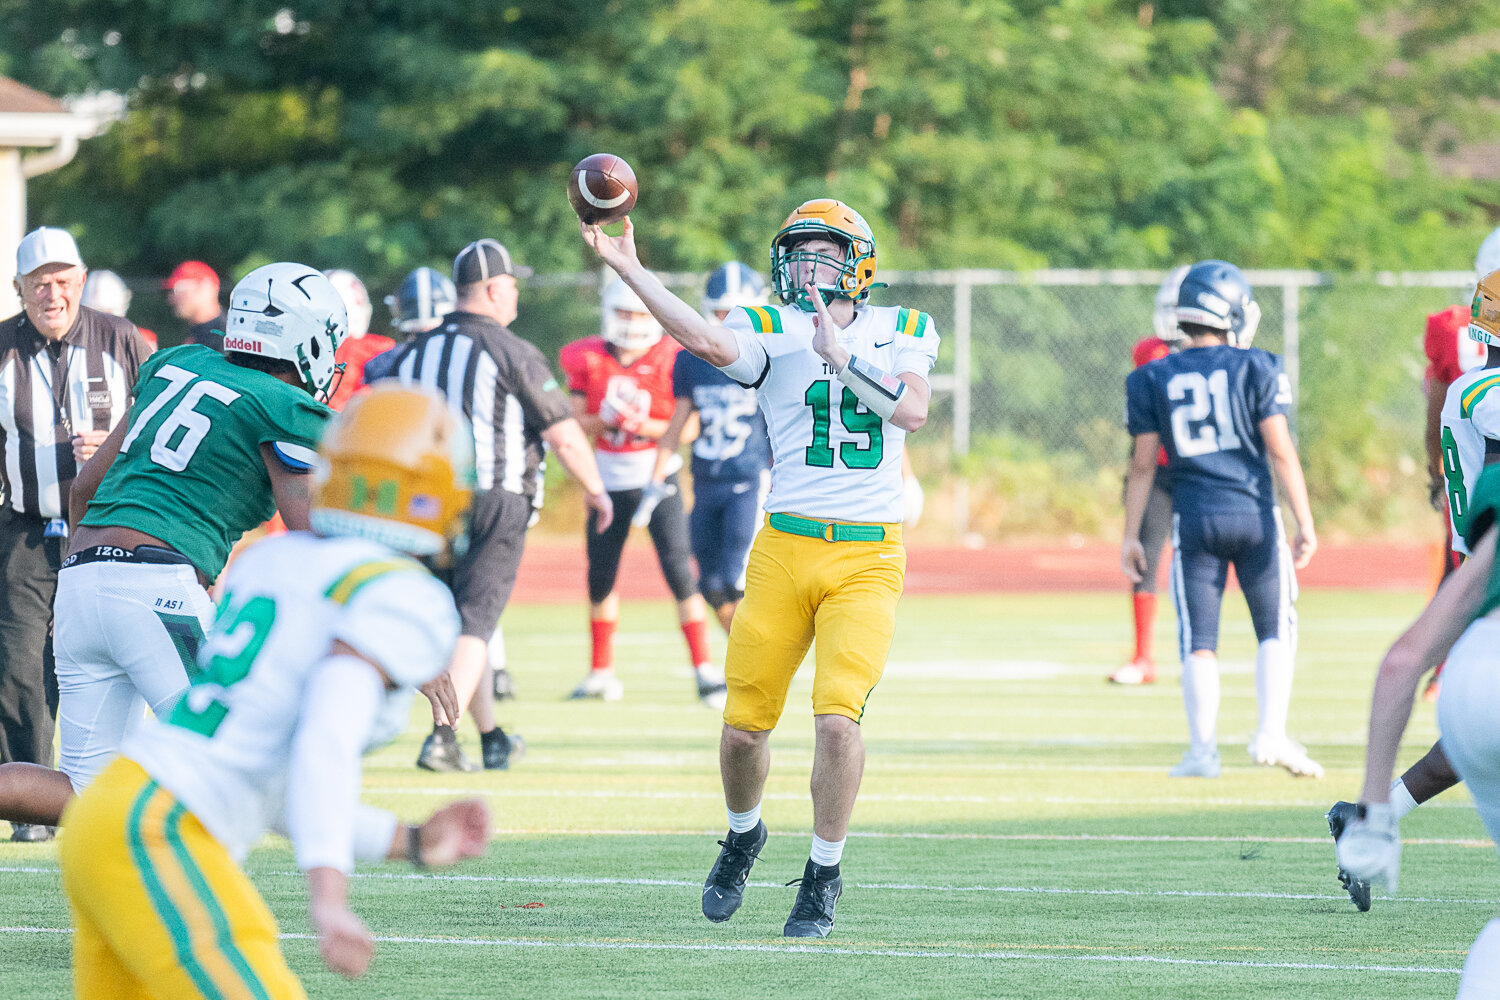 Ethan Kastner slings a pass downfield during Tumwater's jamboree matchup against Peninsula on Friday, Aug. 25.